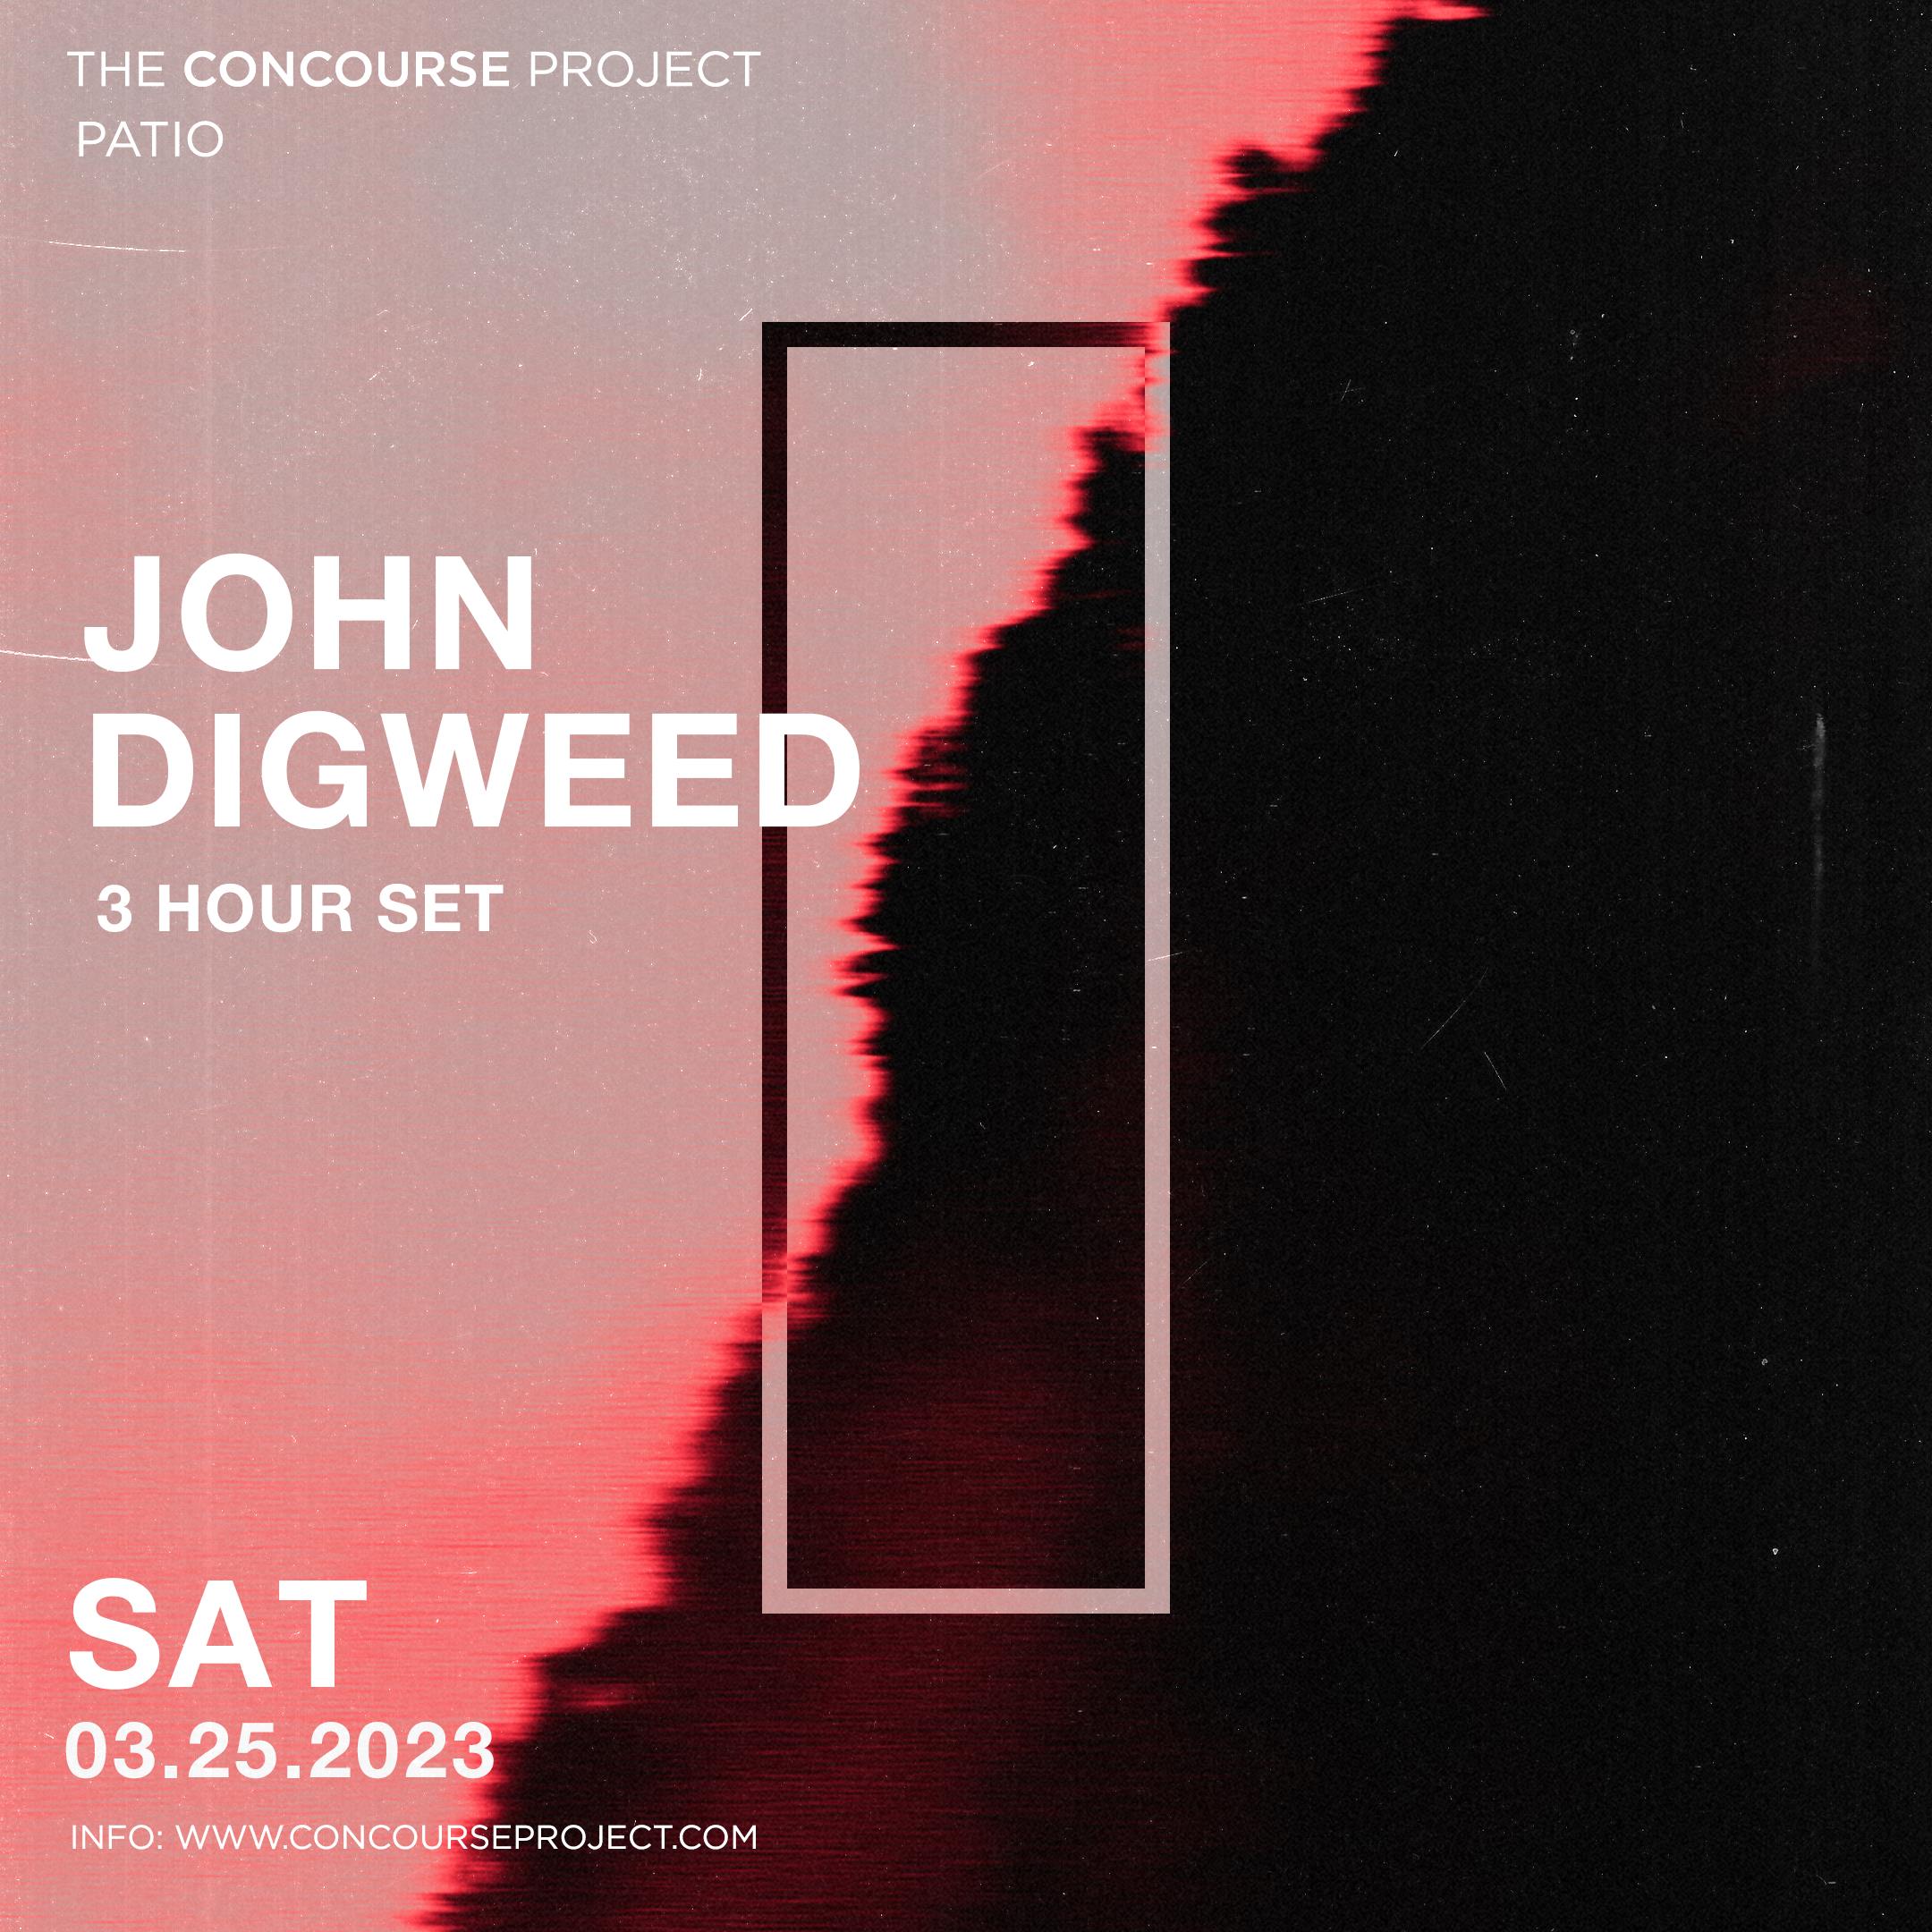 John Digweed (3 Hour Set) at The Concourse Project (Patio)